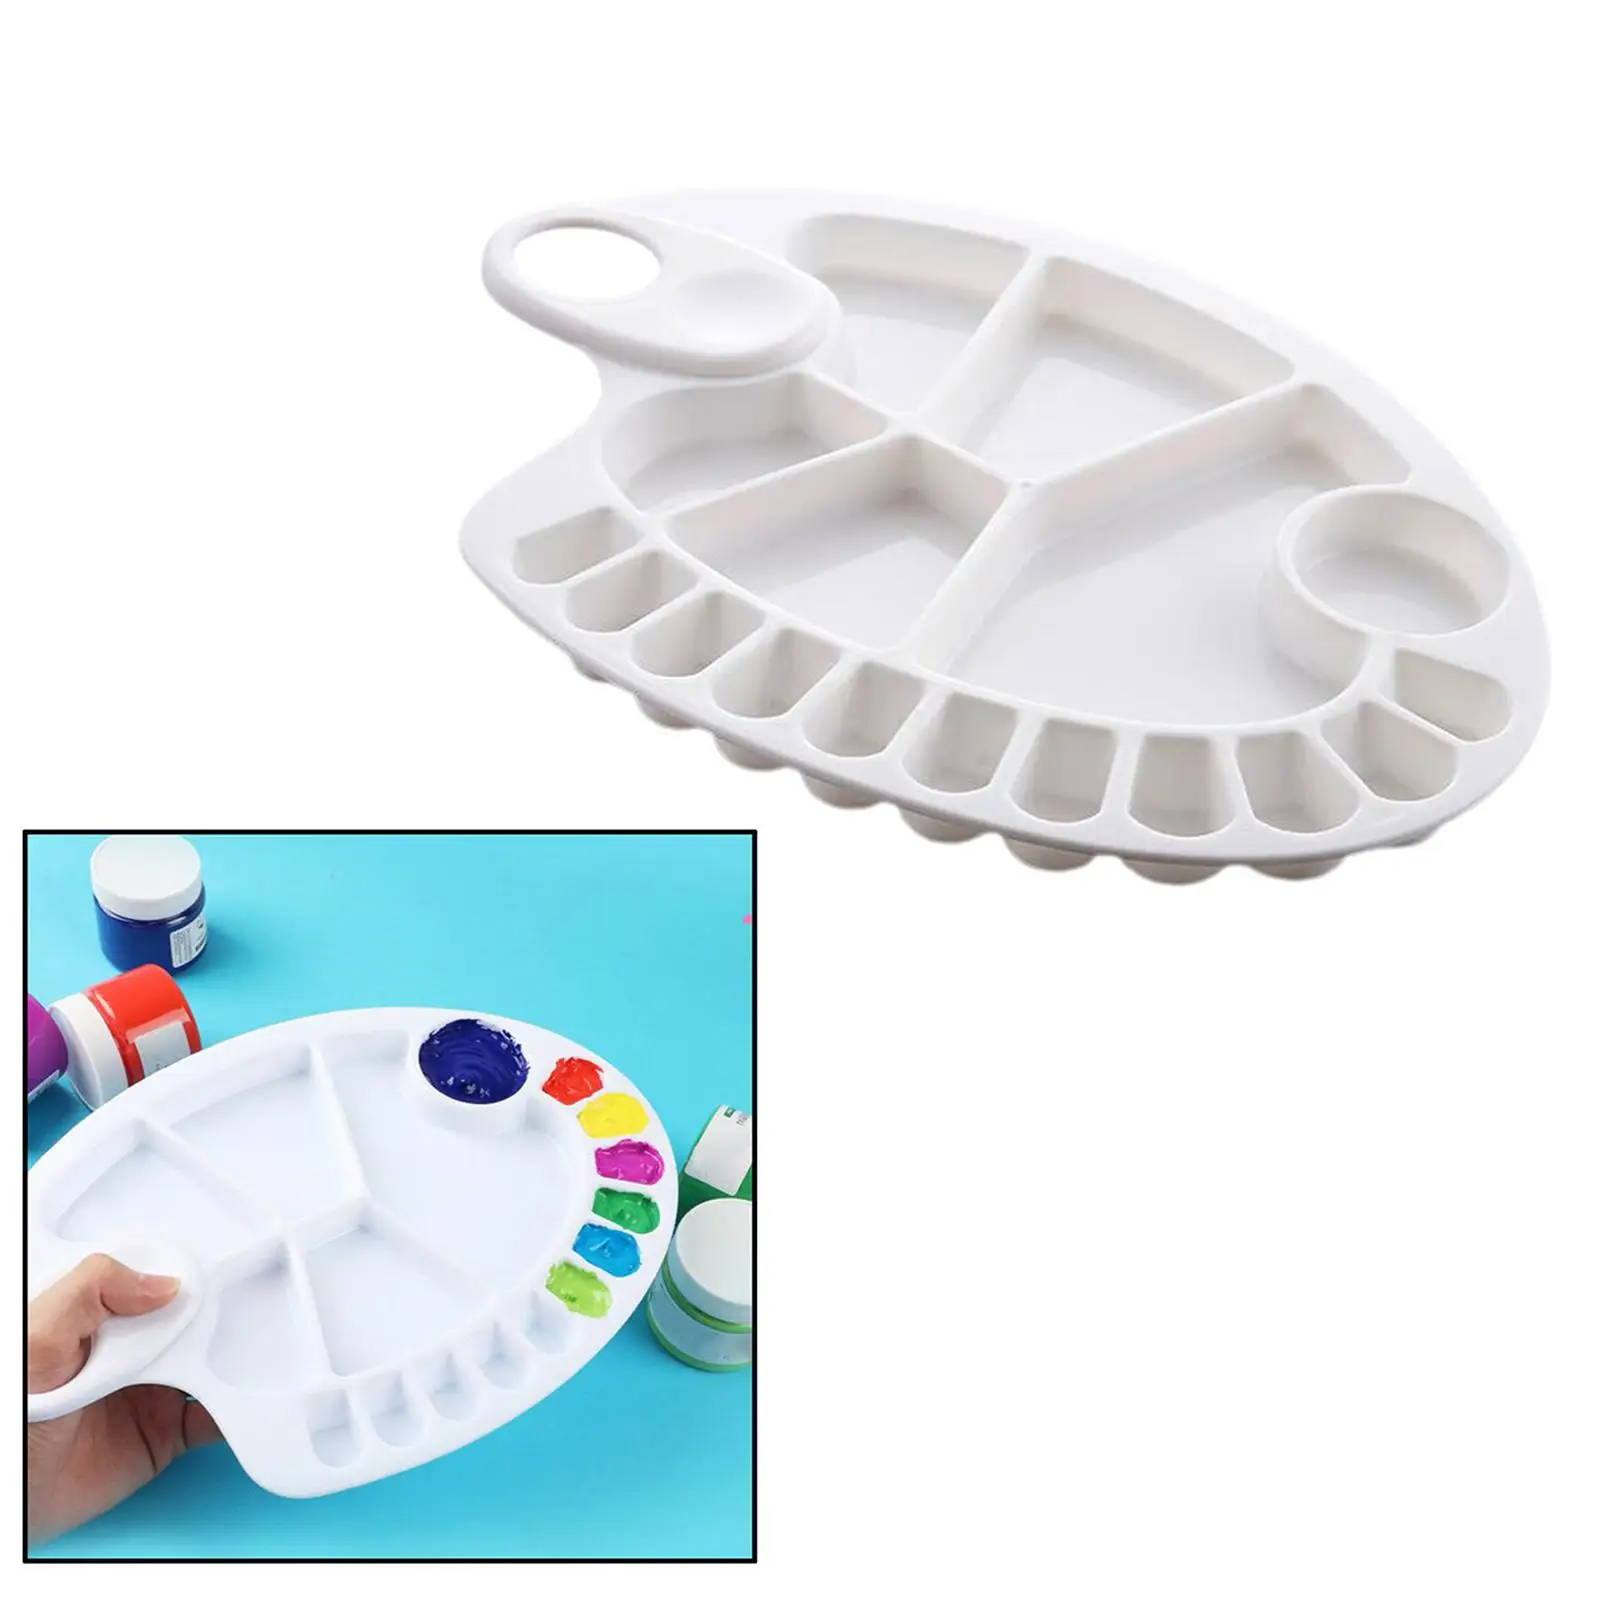 1 piece Paint Tray 1 with Thumb Hole Mixing Professional Tray for Studio